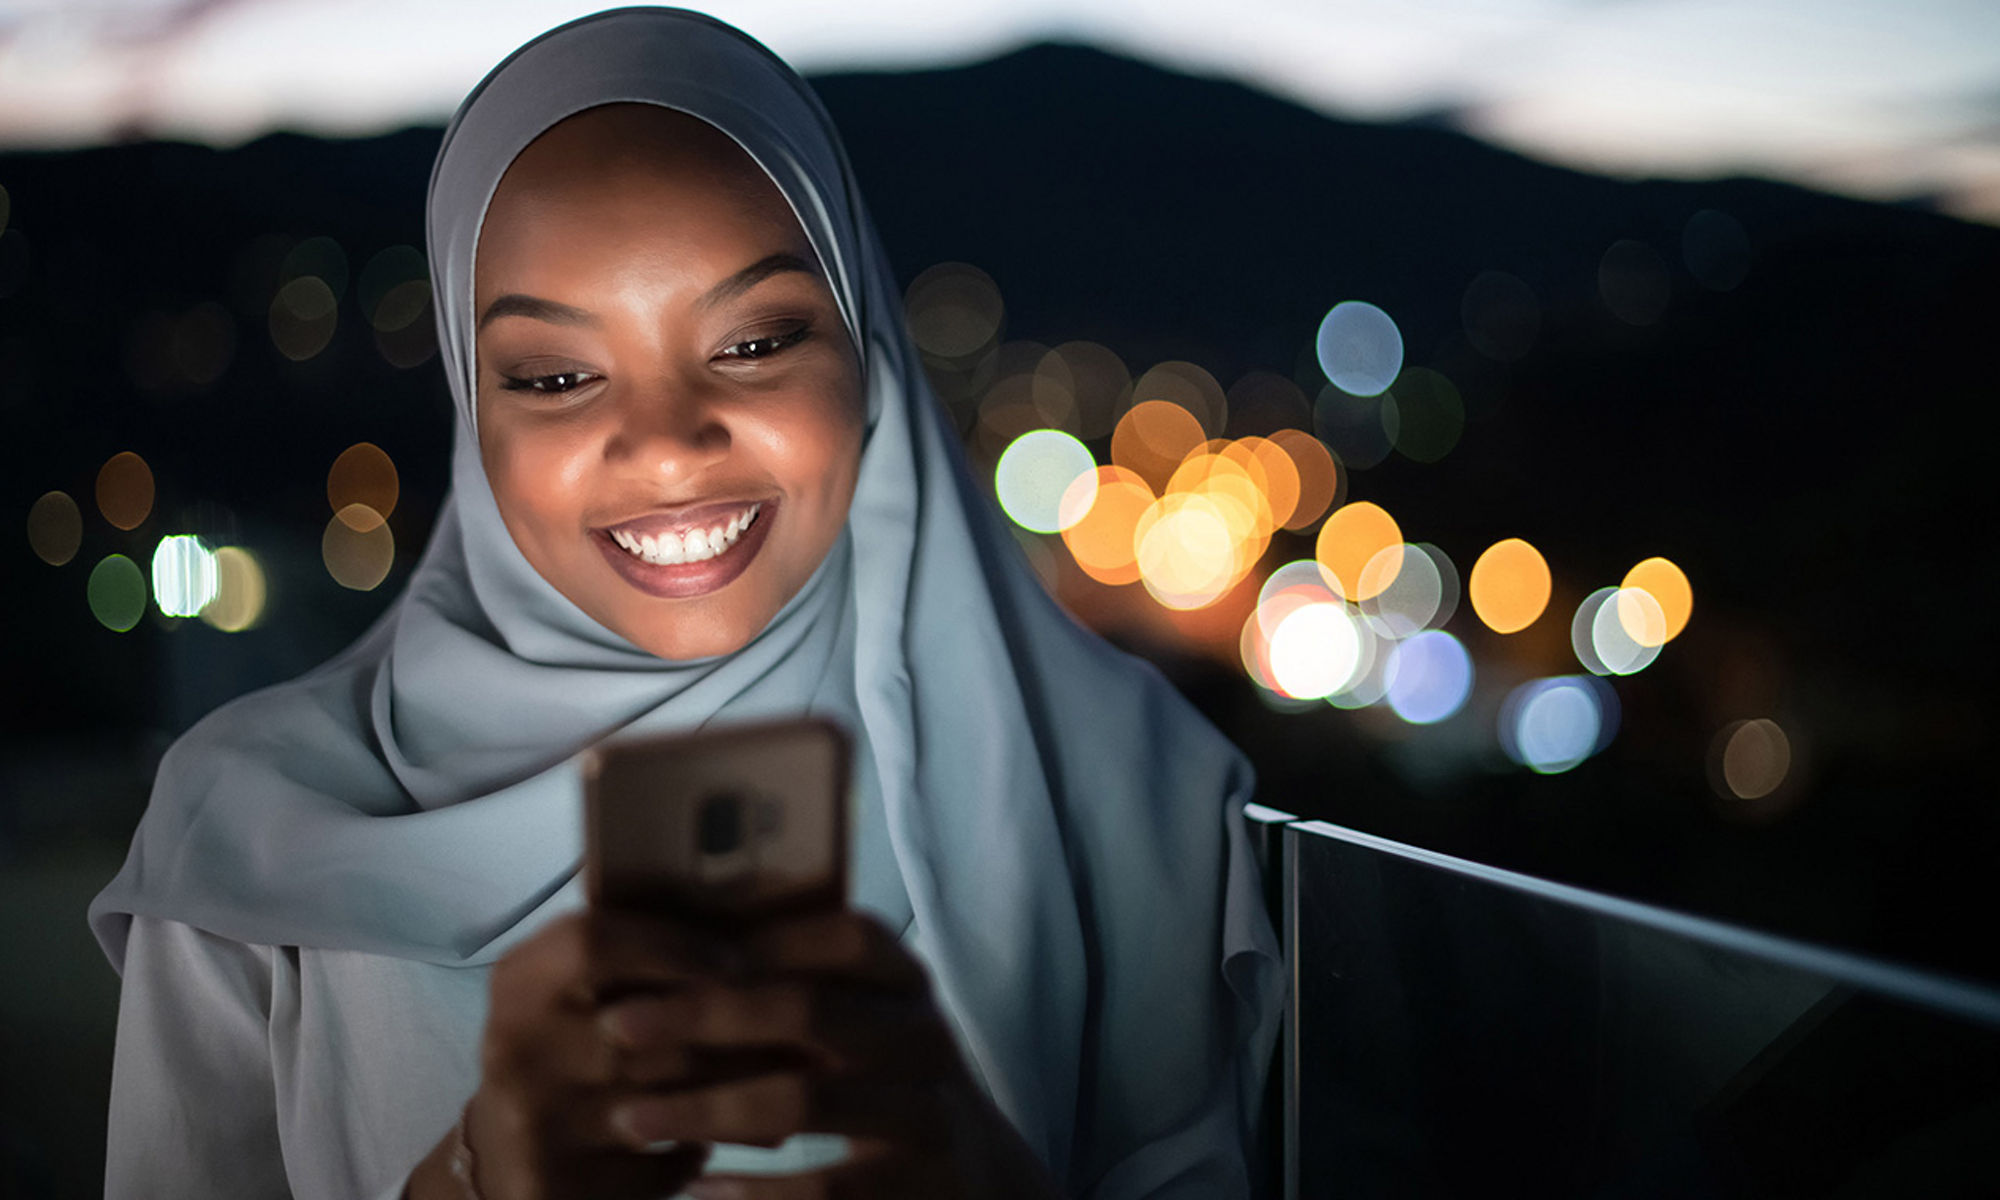 Young Muslim woman outside looking at her mobile phone with blurred sunset sky and city lights behind her